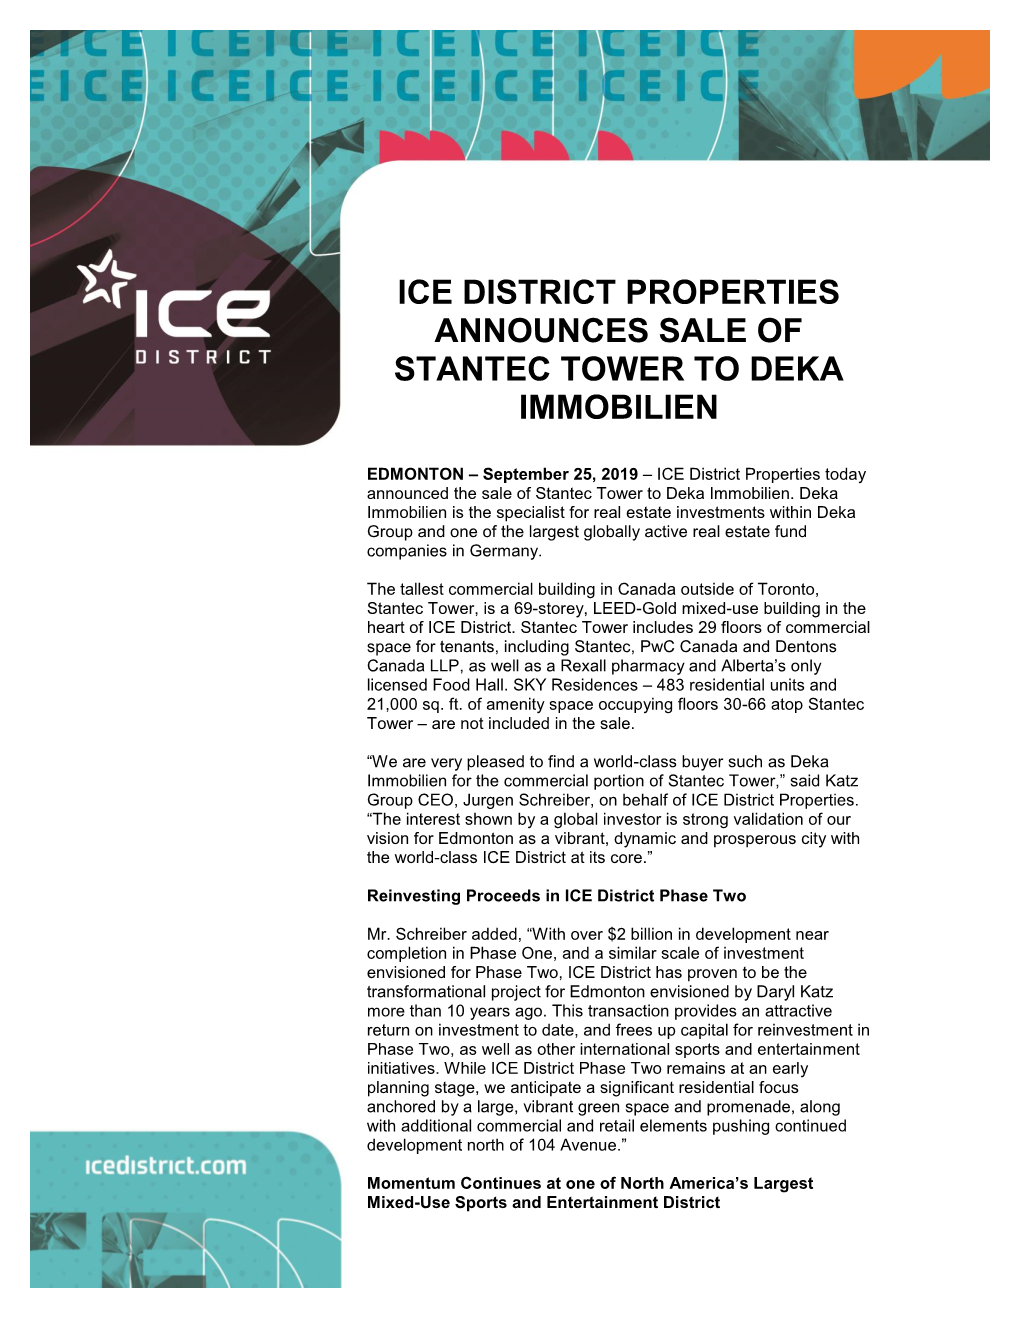 Ice District Properties Announces Sale of Stantec Tower to Deka Immobilien